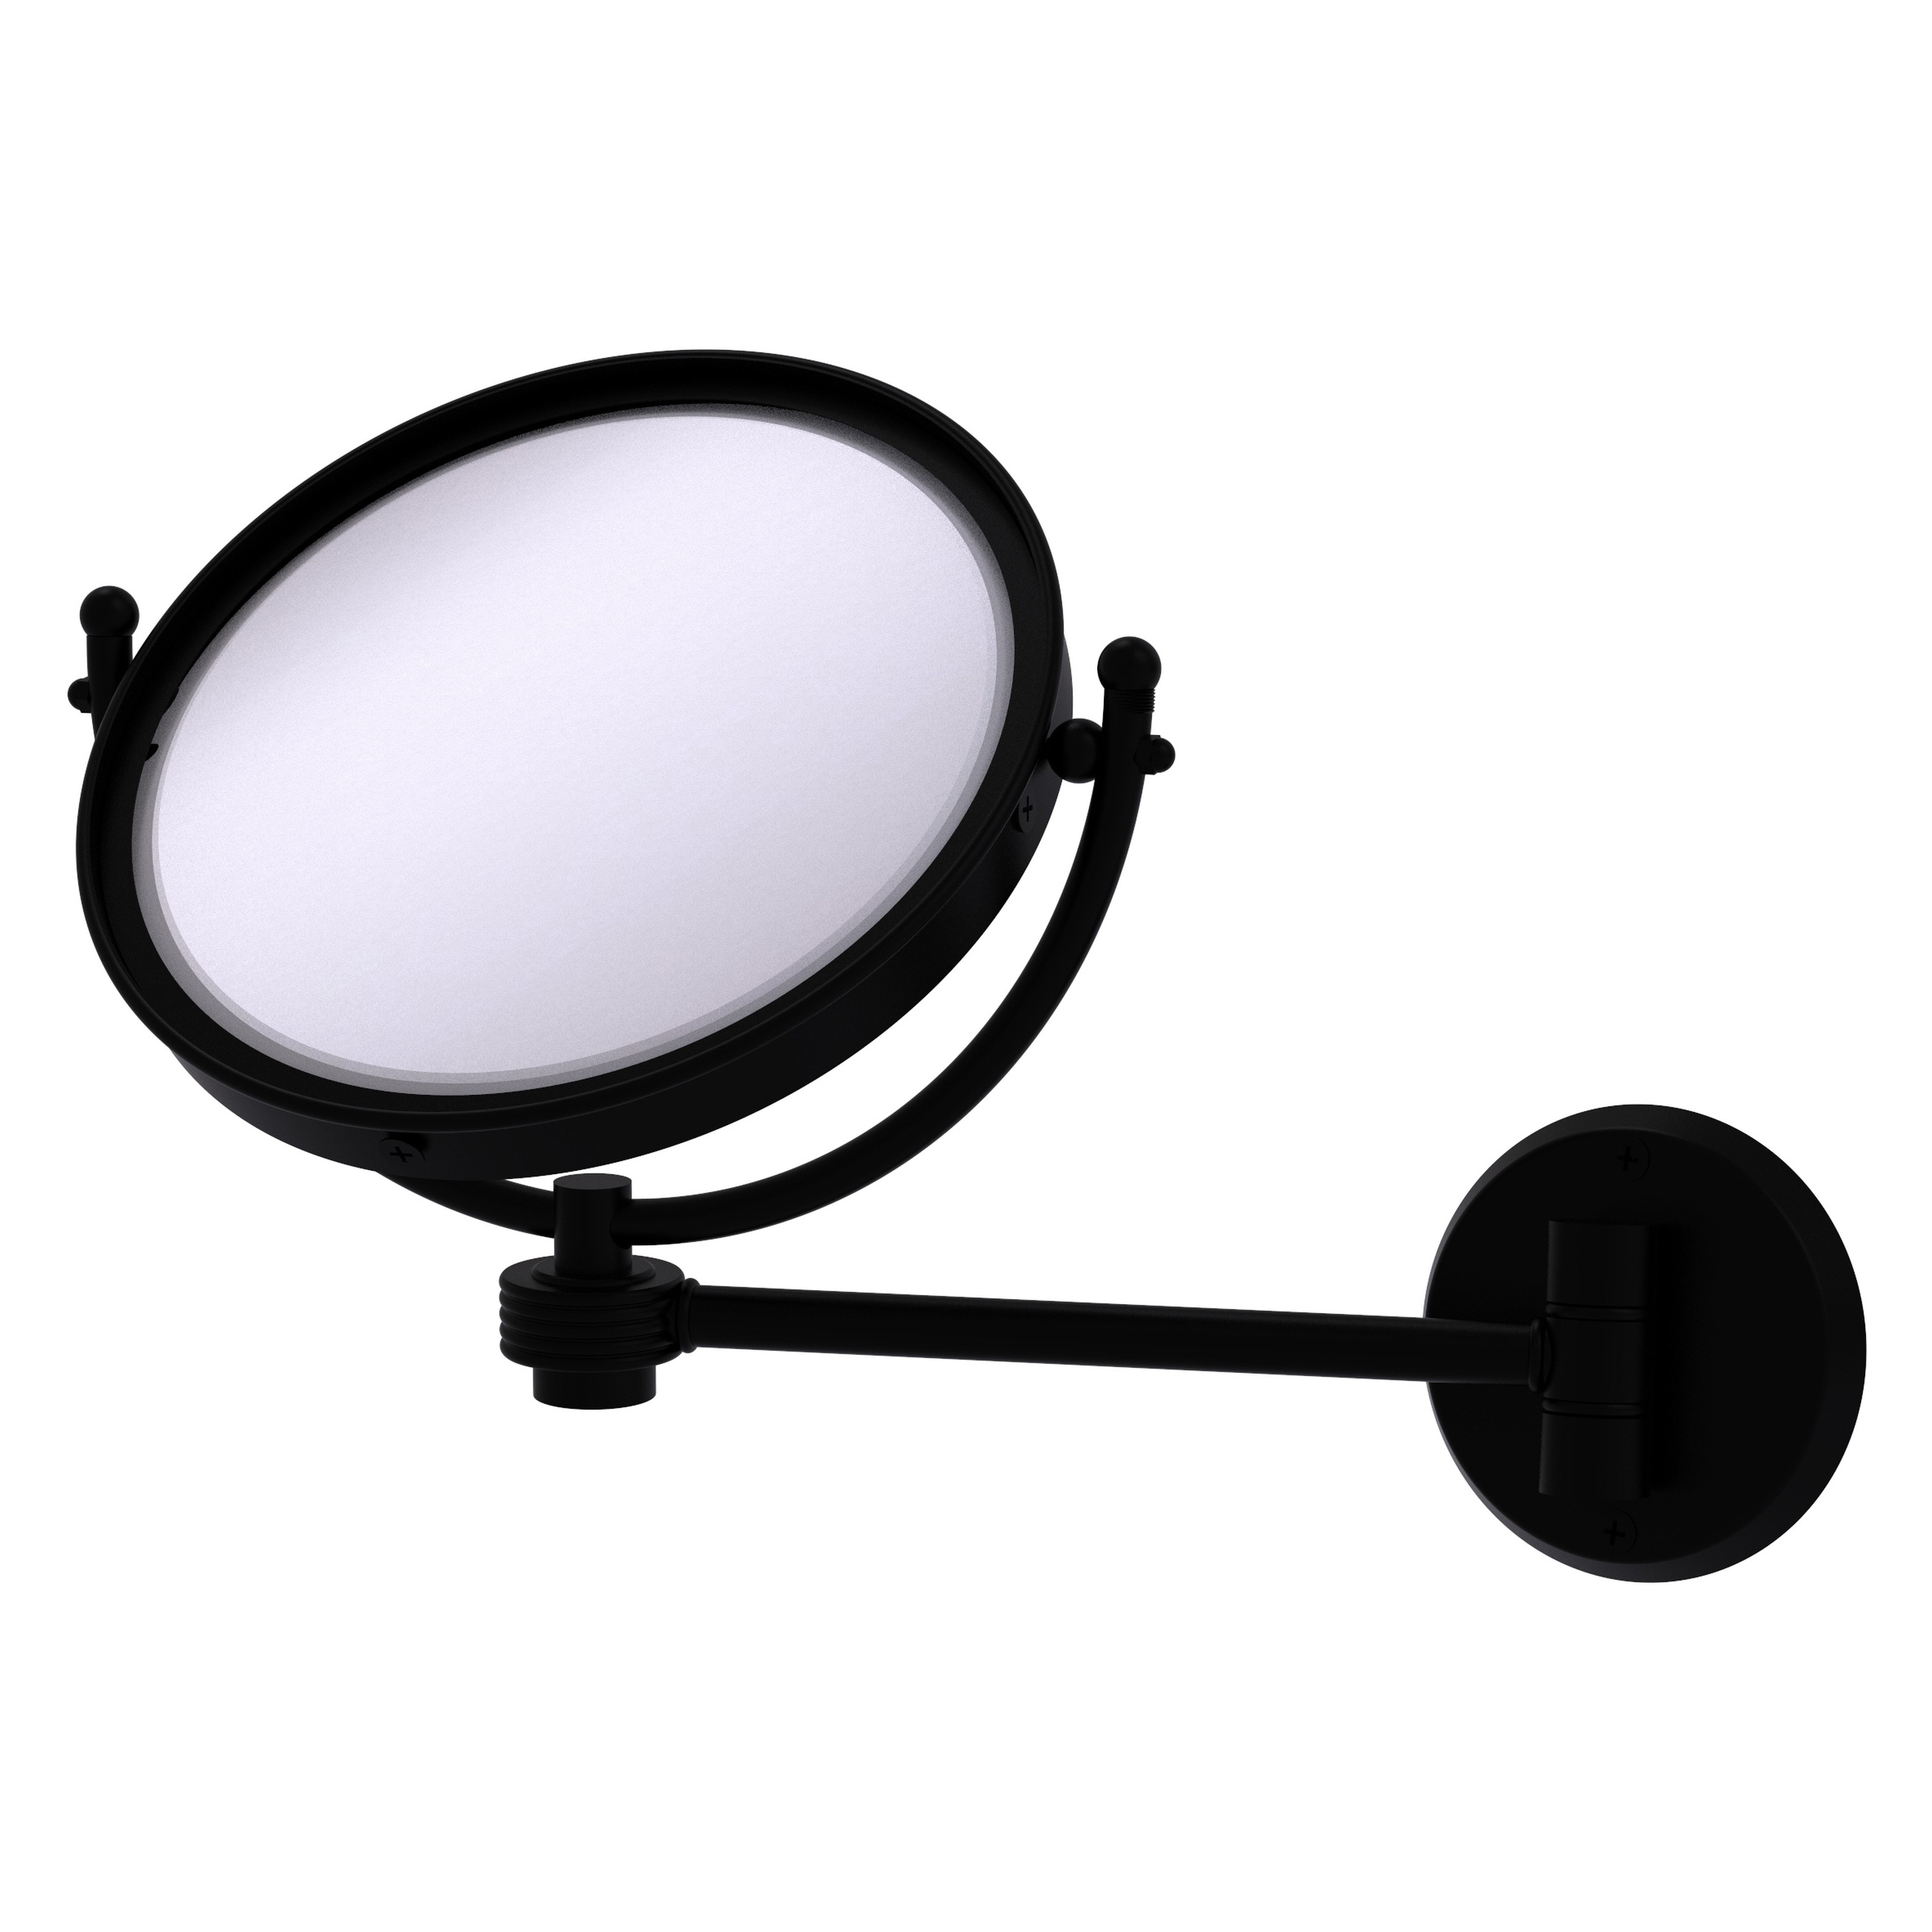 8-in x 10-in Matte Gray Double-sided 5X Magnifying Wall-mounted Vanity Mirror | - Allied Brass WM-5G/5X-BKM